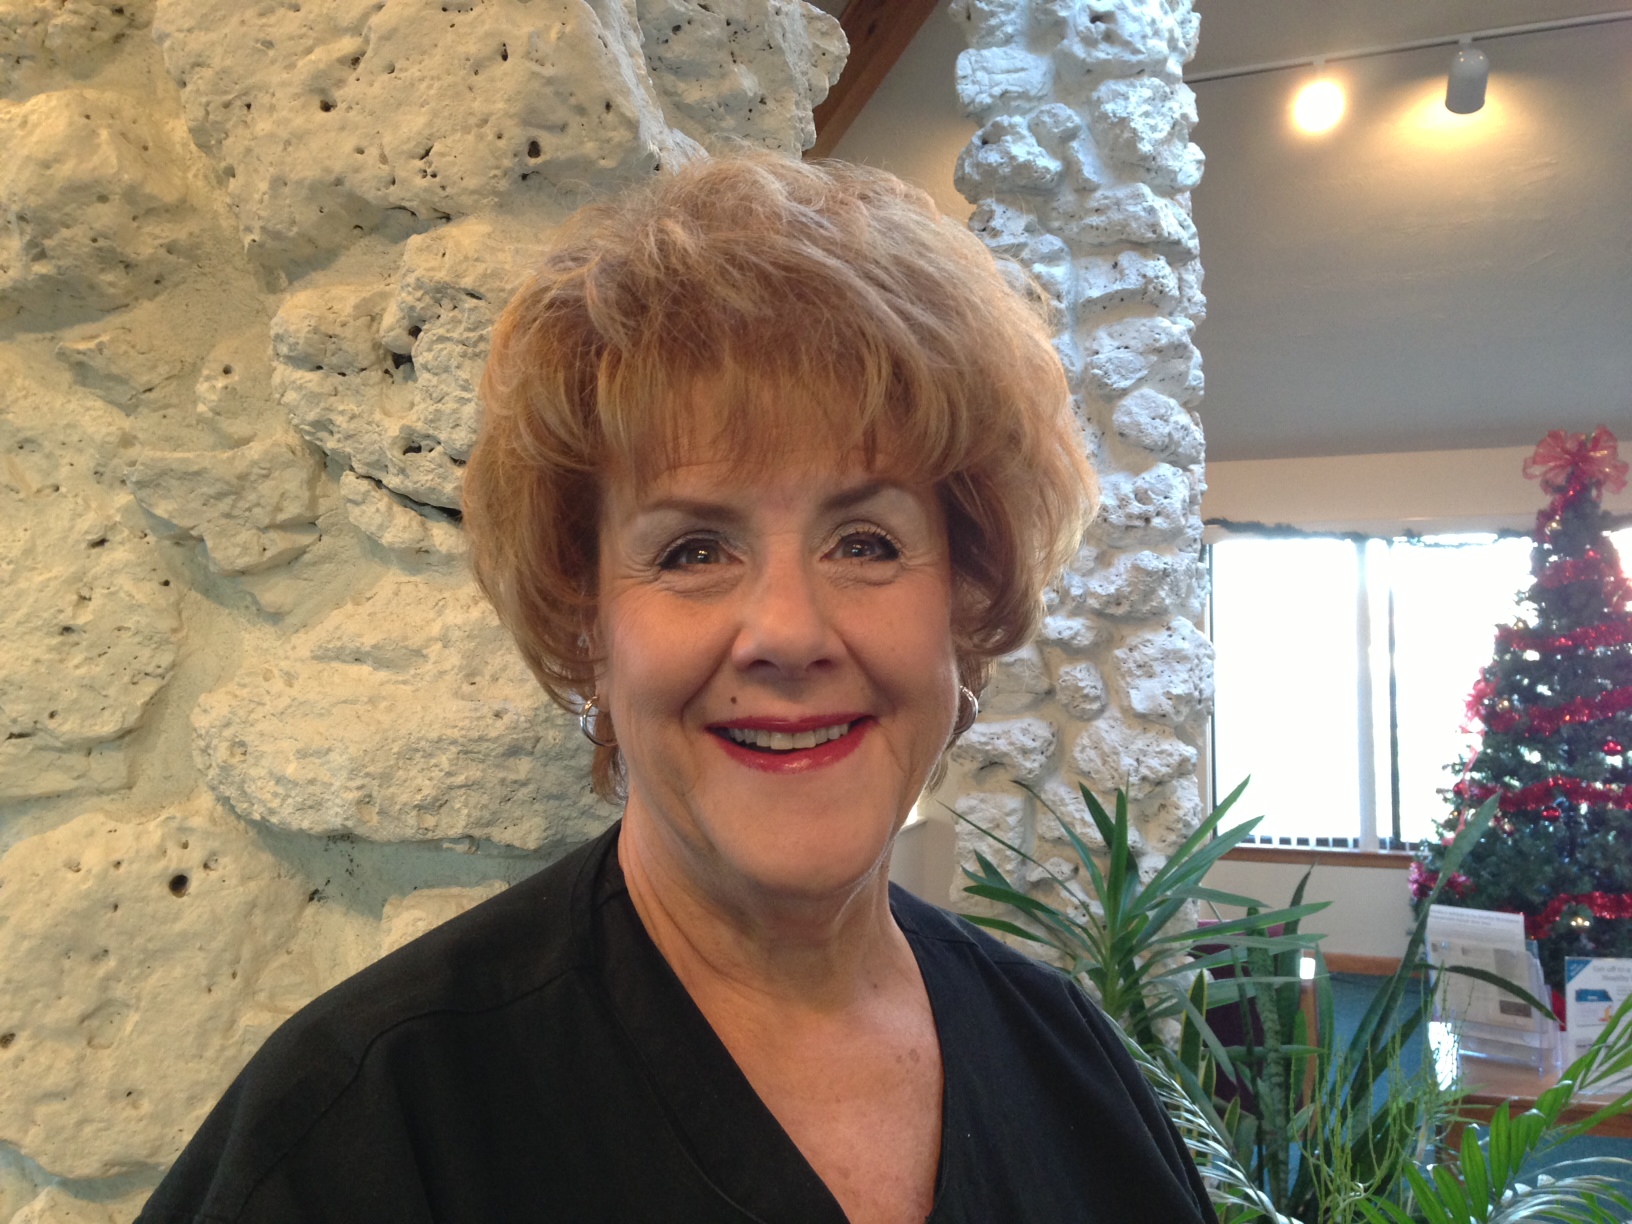 Clinton Township Patient Tells Story: Chiropractic changes lives